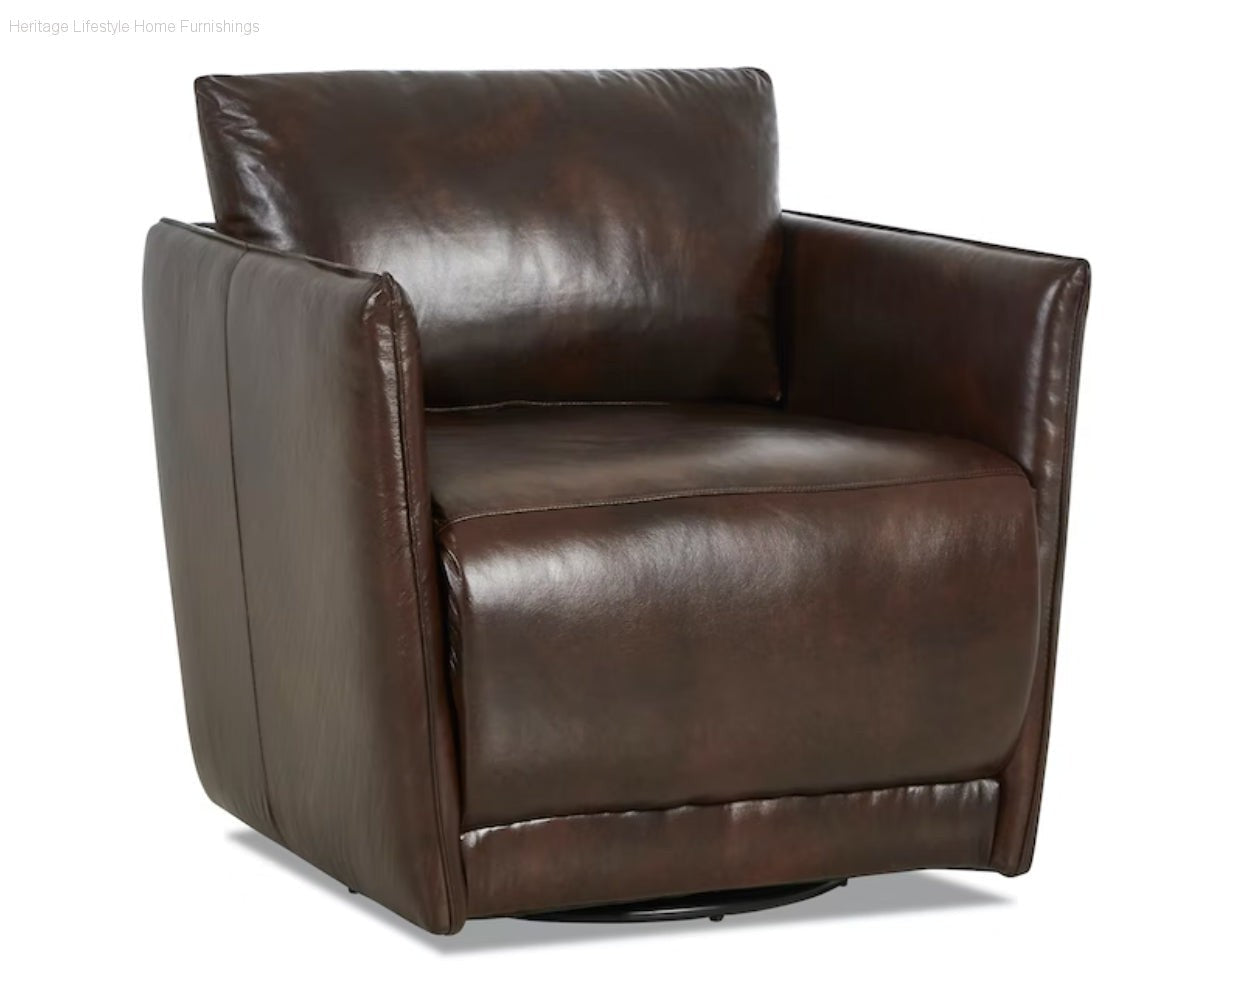 Accent Chair - Elon Leather Swivel Chair